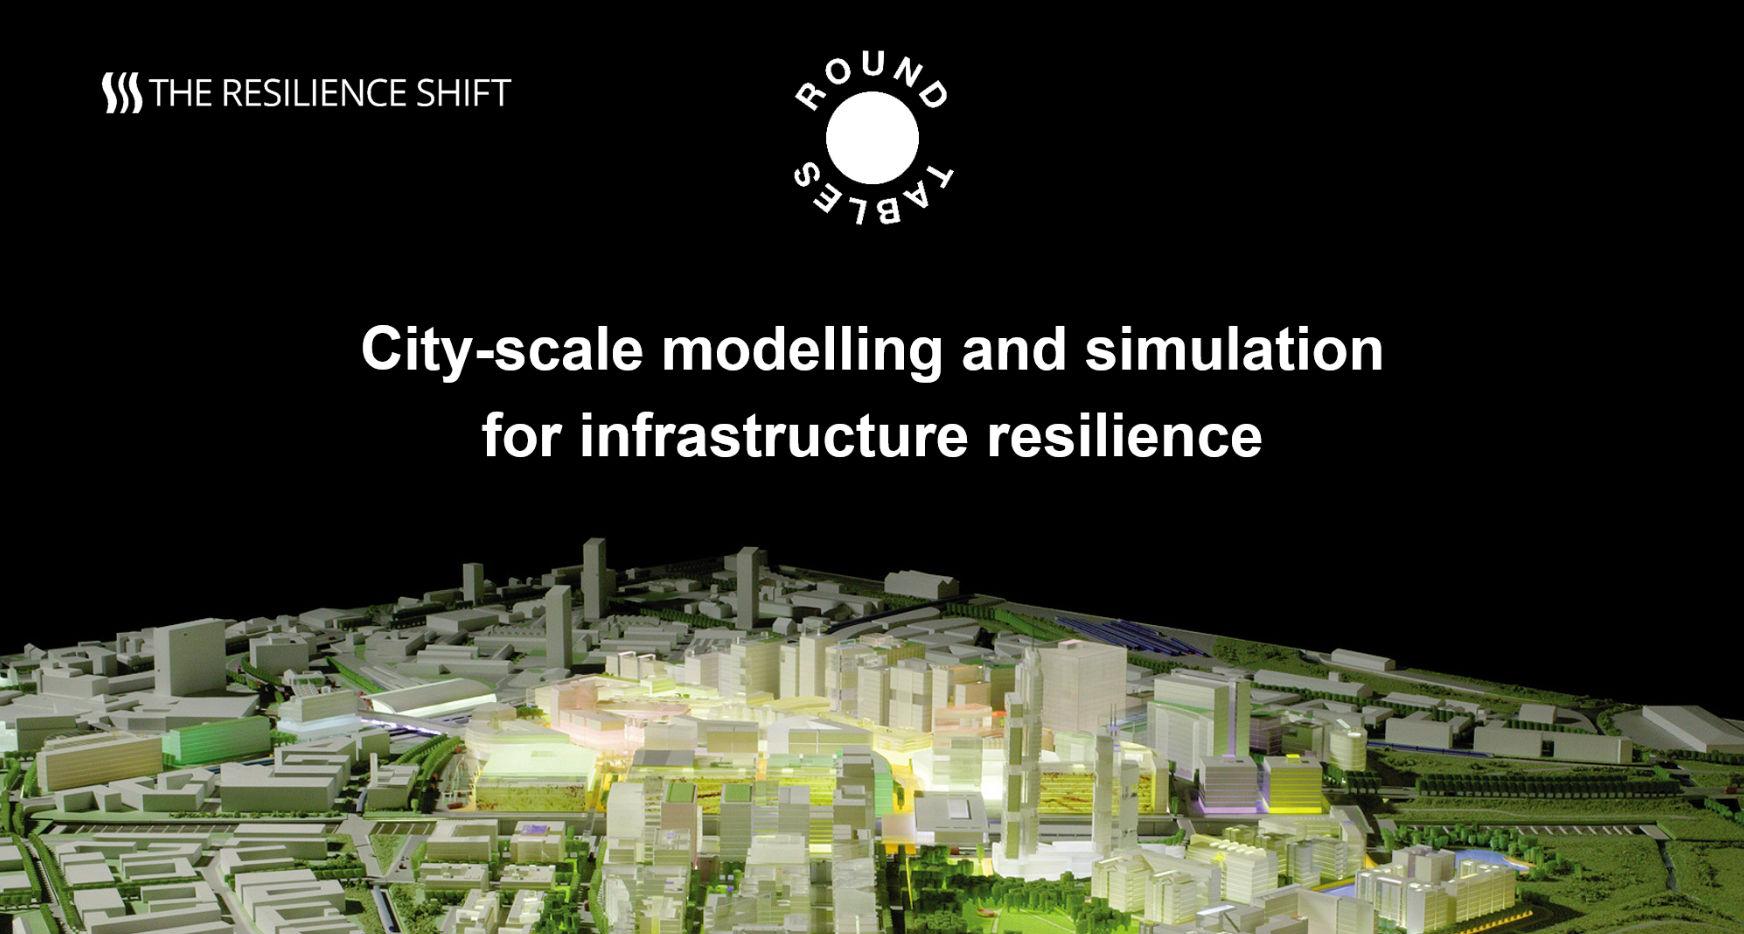  City-scale modelling and simulation for infrastructure resilience round-table